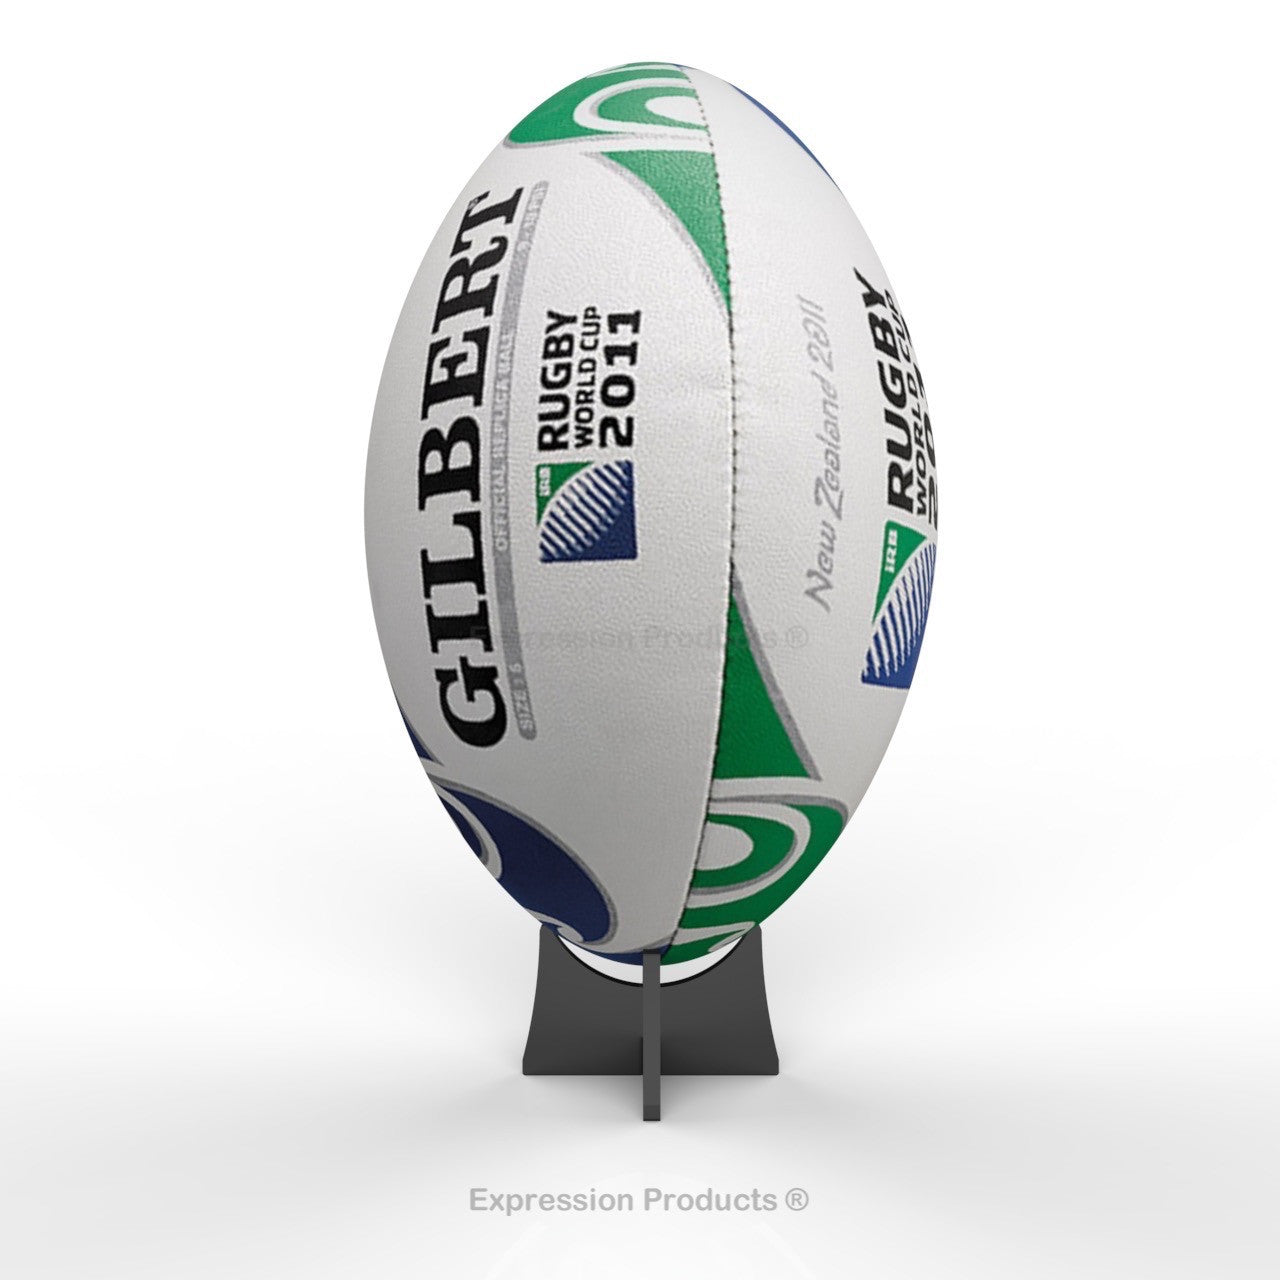 Rugby Ball Display Stand - Expression Products Ltd